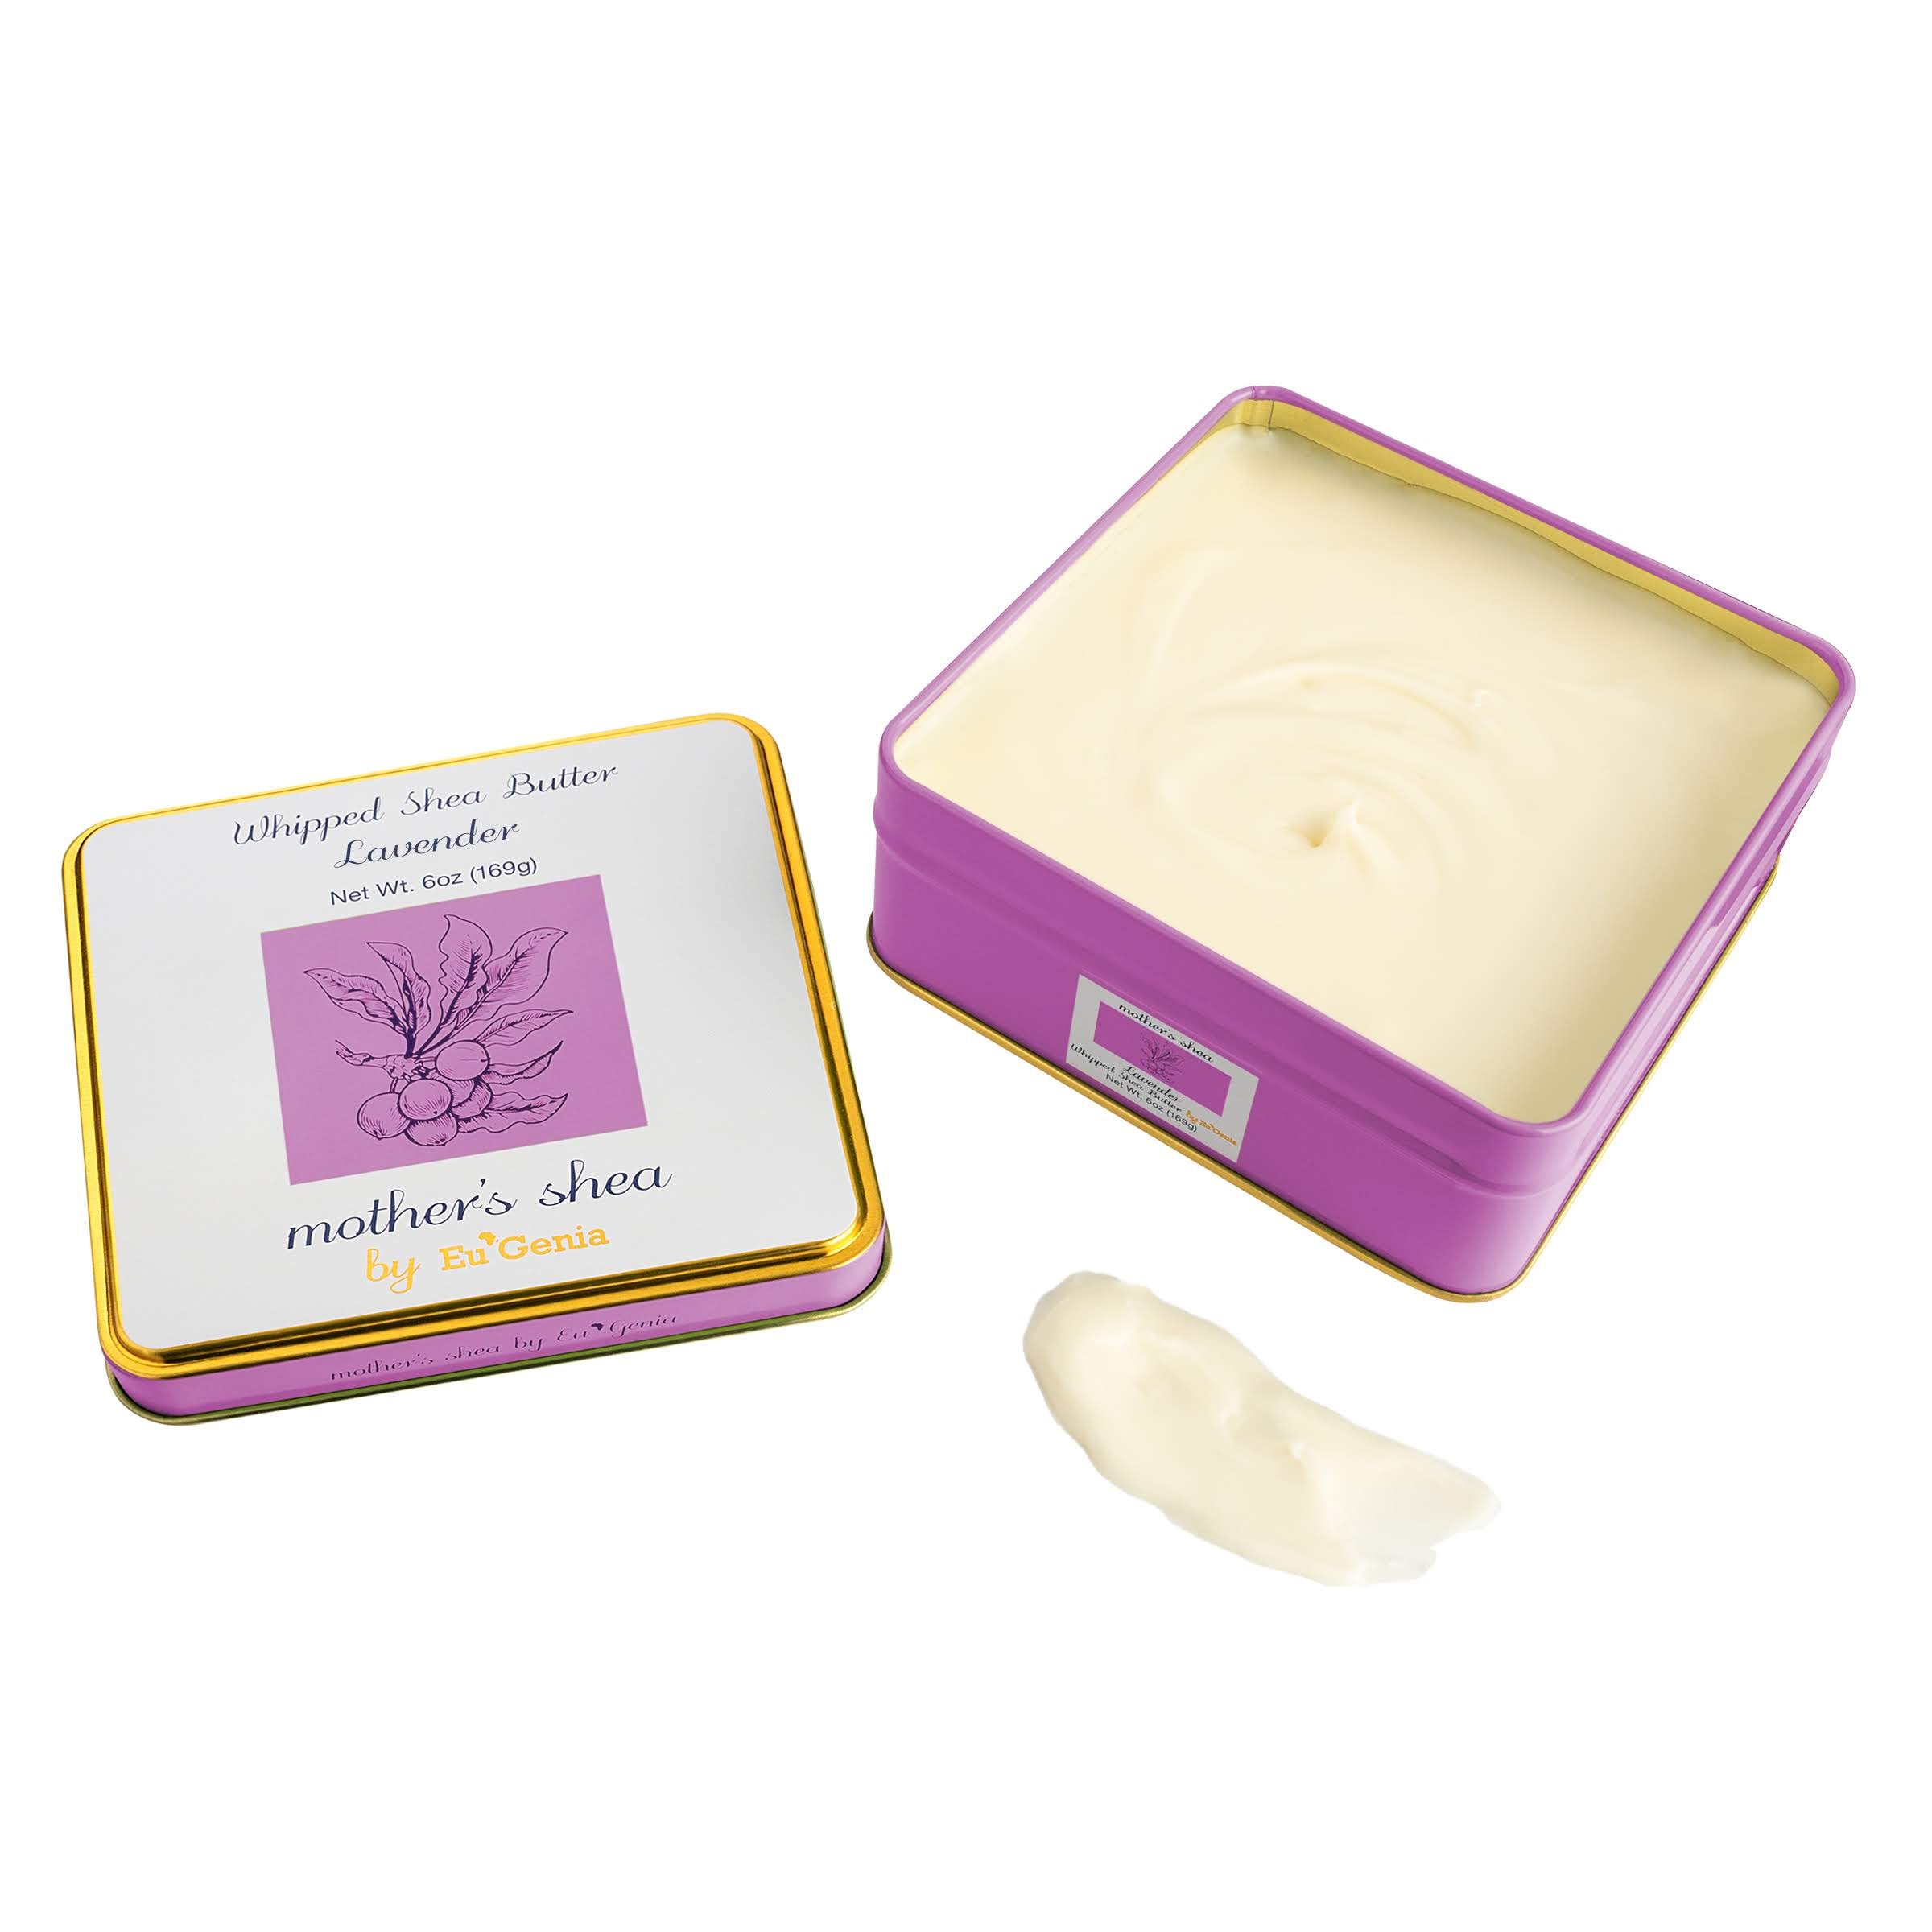 Lavender Scented Whipped Butter - Subscription